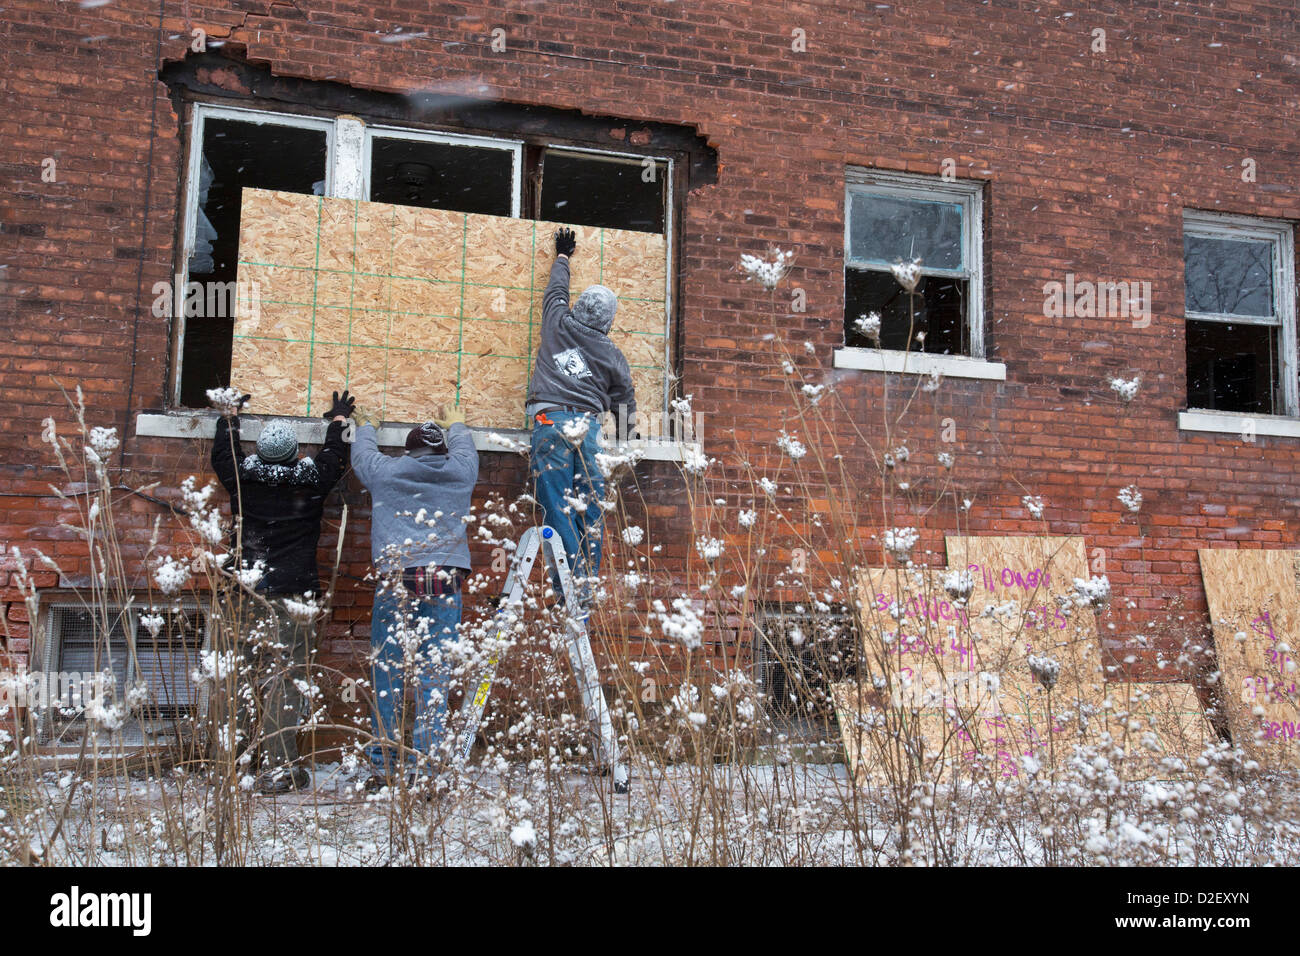 On Martin Luther King Jr. Day, volunteers from Wayne State University and neighborhood residents boarded up abandoned houses. Stock Photo